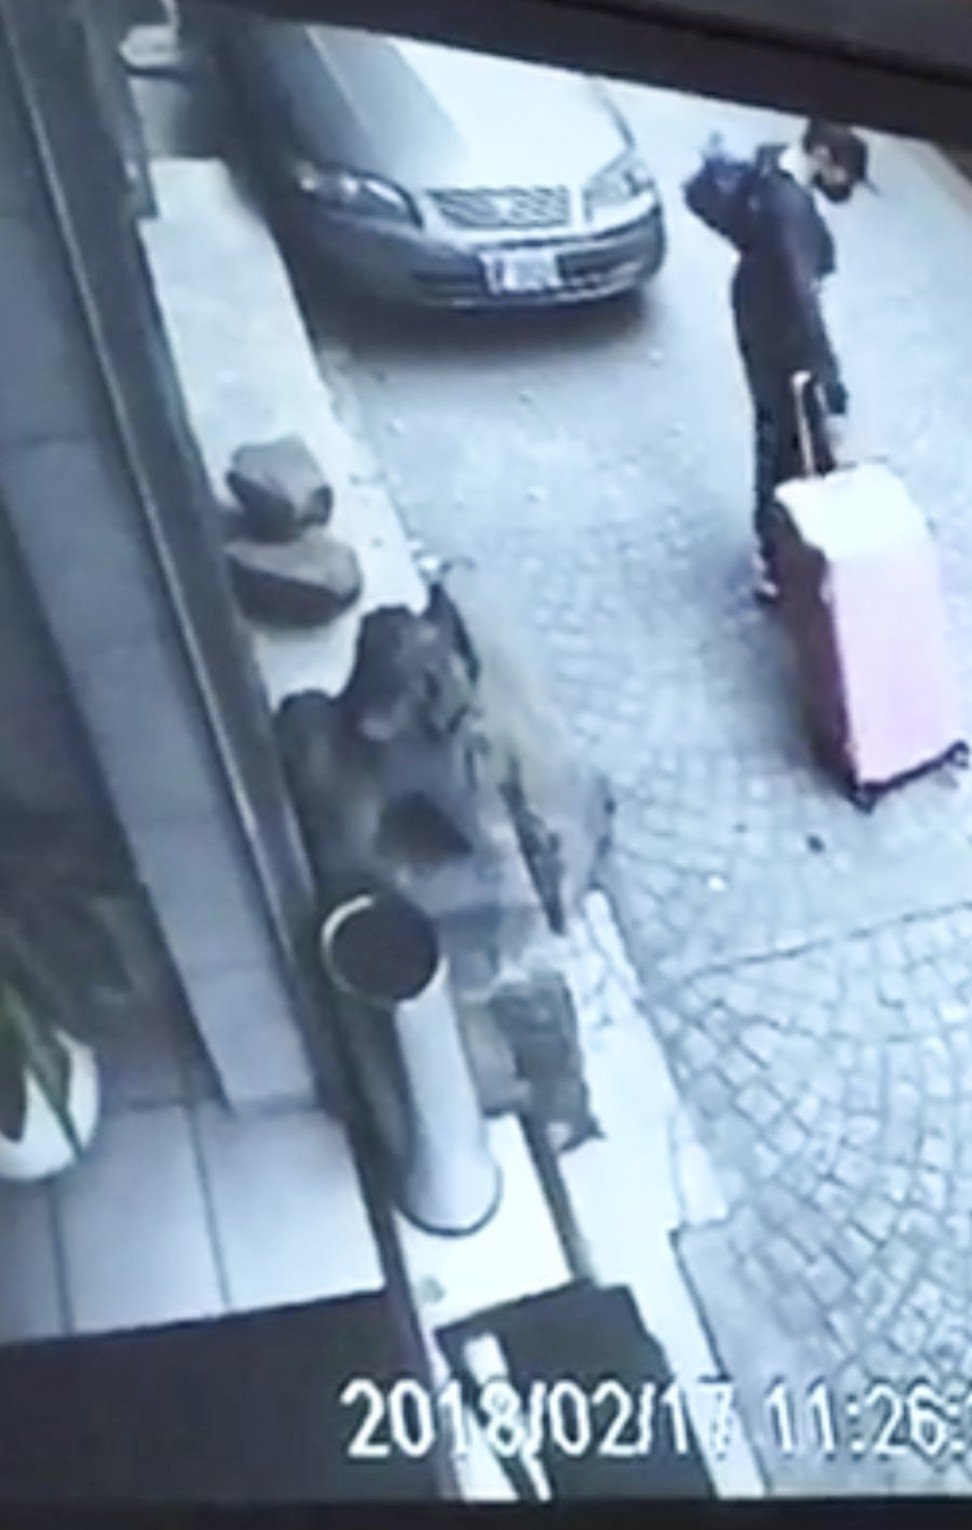 Security footage from Purple Garden Hotel in Taipei shows the man with a large suitcase. Photo: Handout